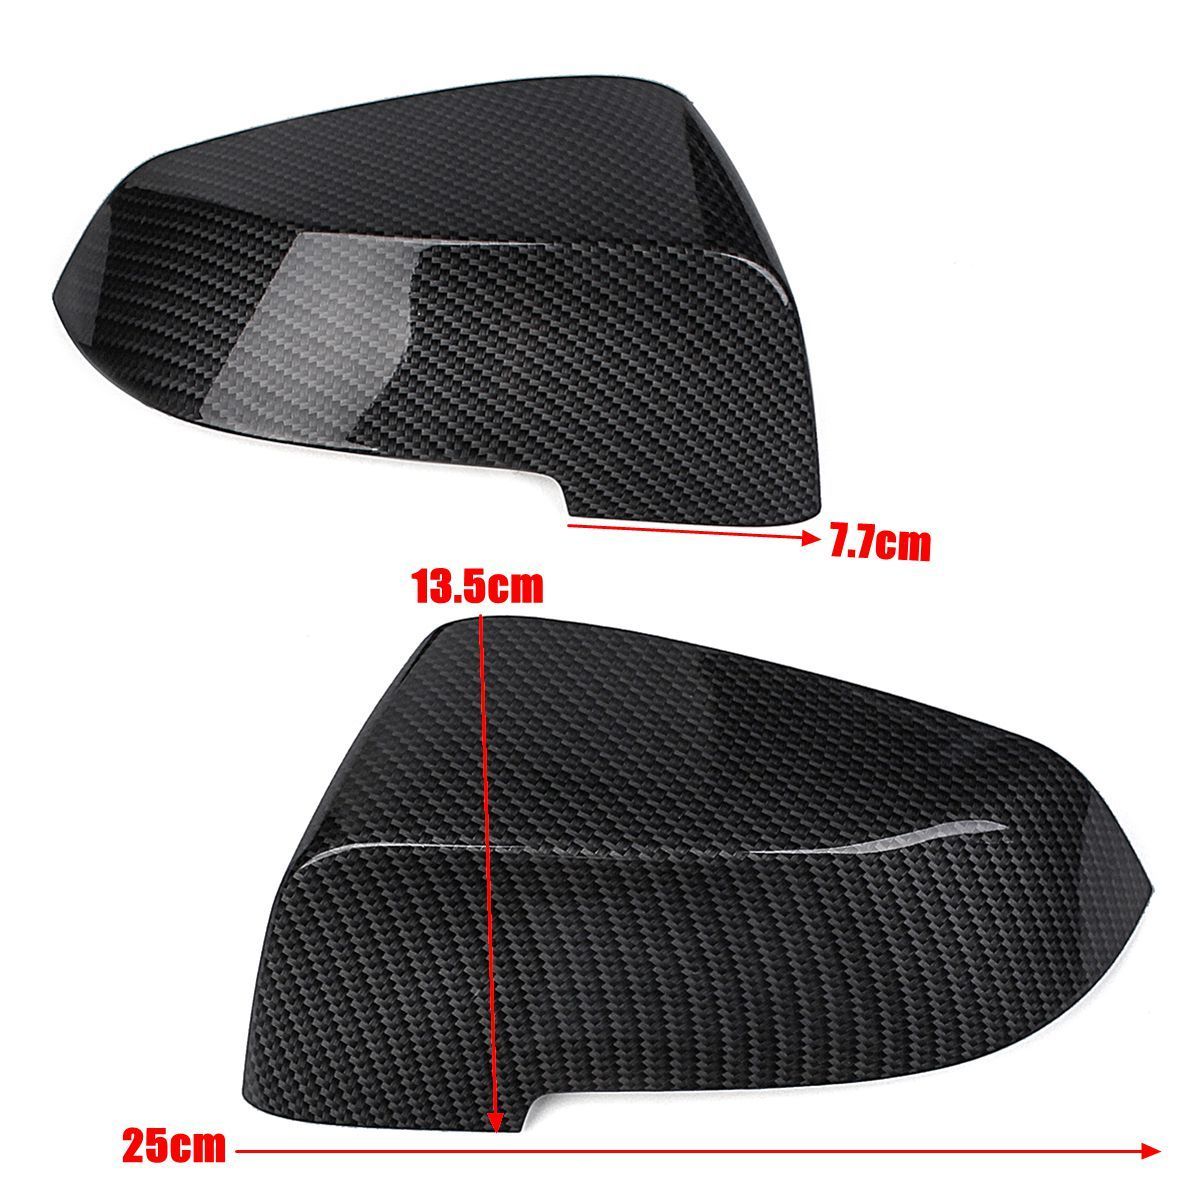 2Pcs-Carbon-Fiber-Side-Wing-Rear-View-Mirror-Covers-Caps-For-BMW-F10-F11-2014-2017-1662848